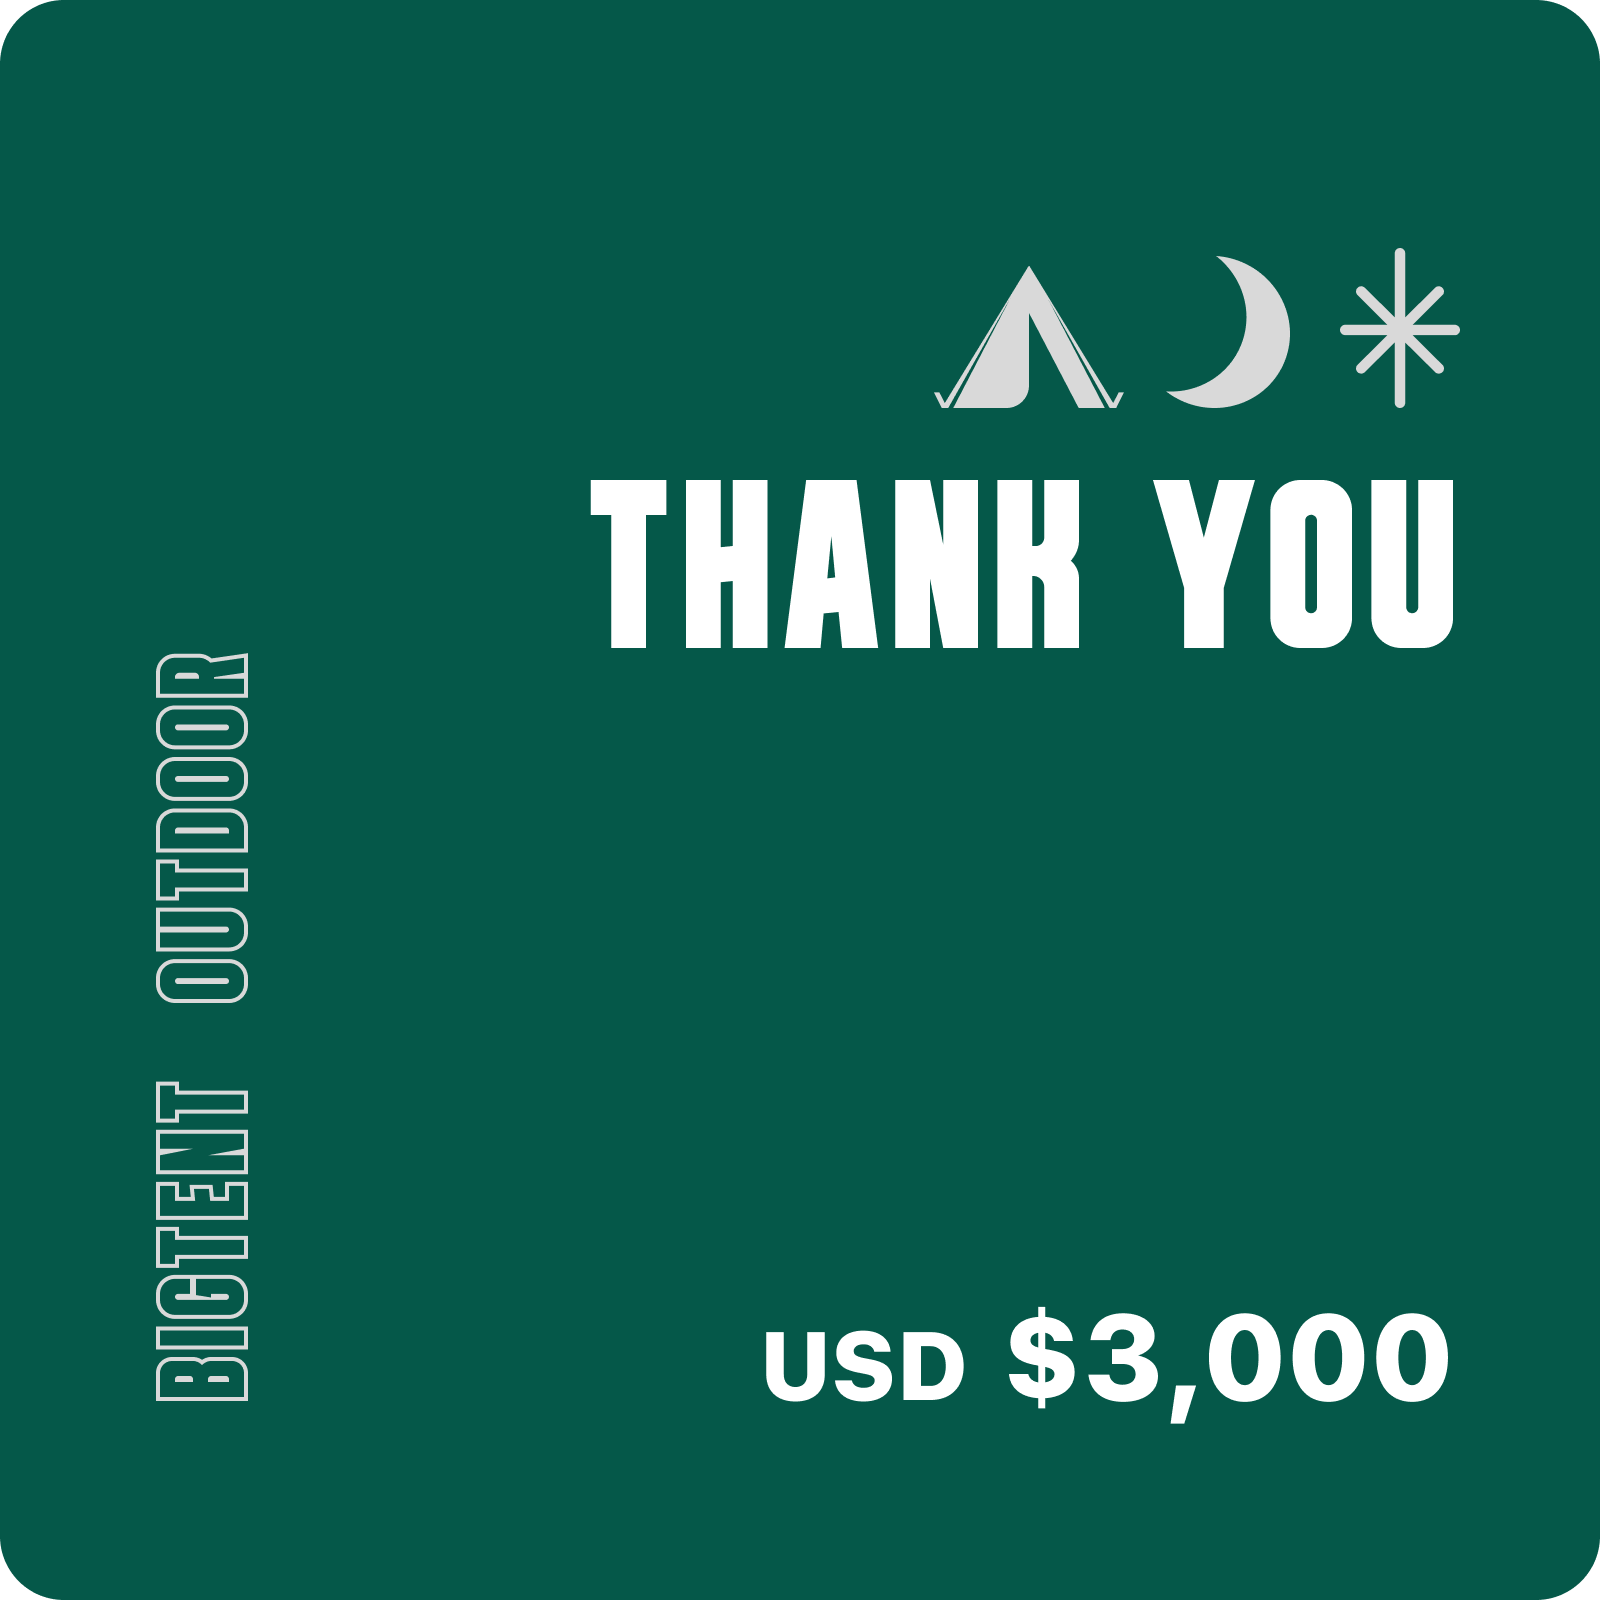 bigtent giftcard $3,000 usd